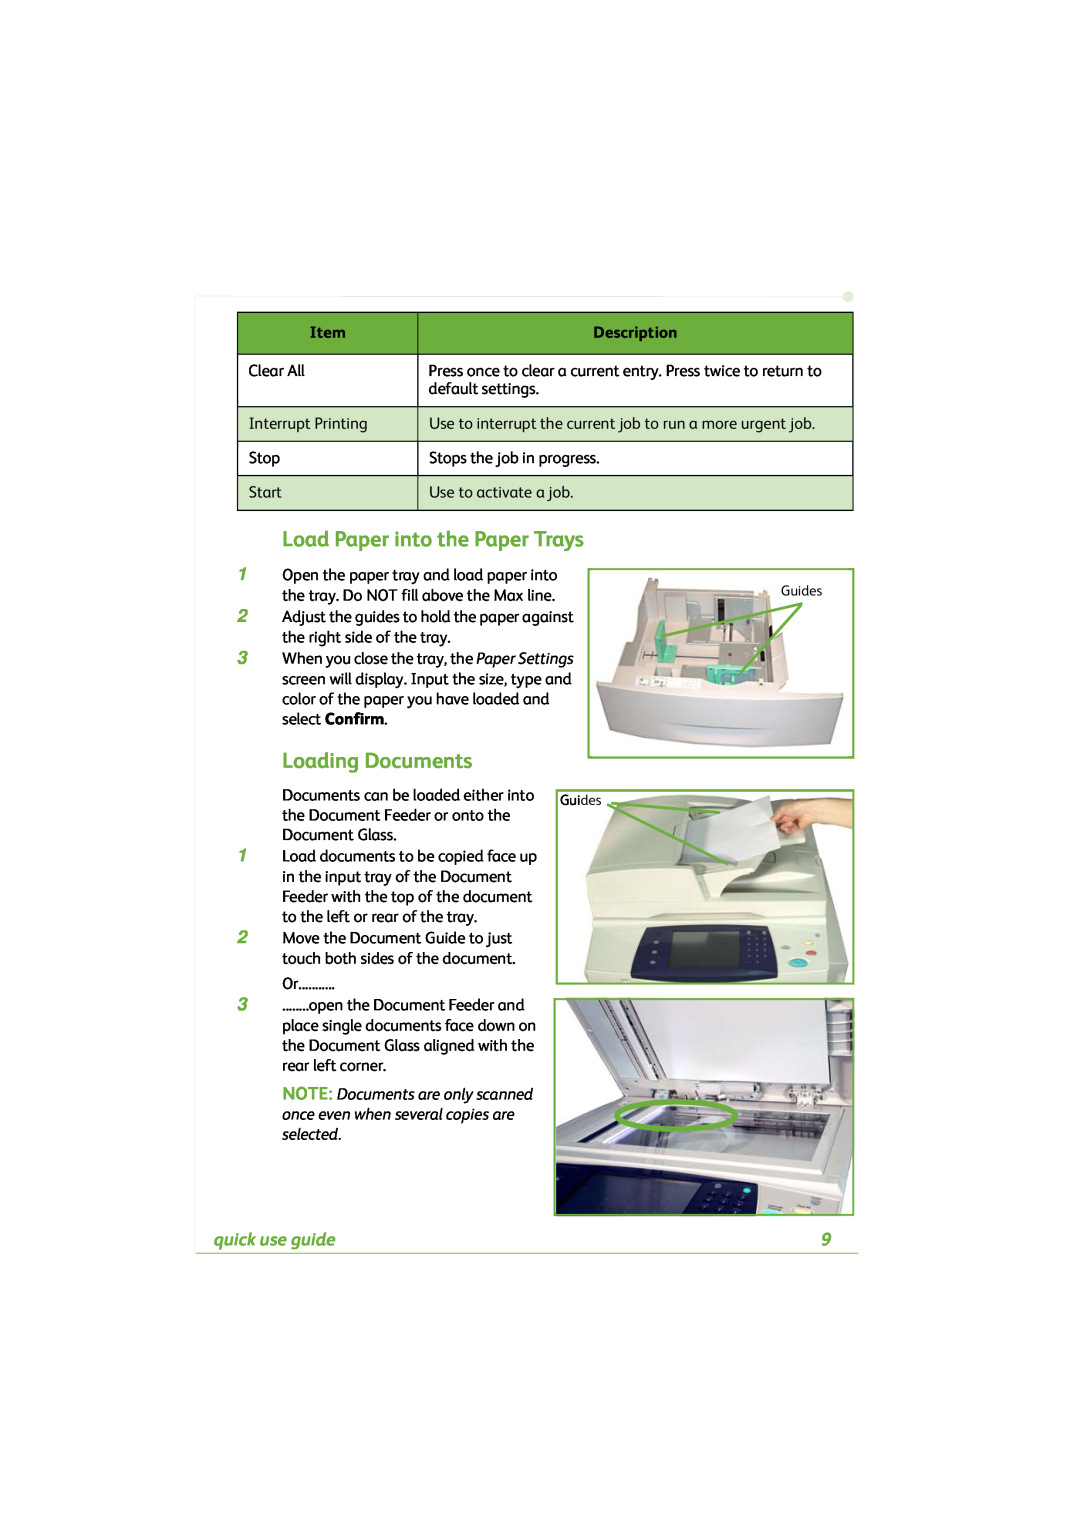 Xerox 4260C manual Load Paper into the Paper Trays, Loading Documents, quick use guide 